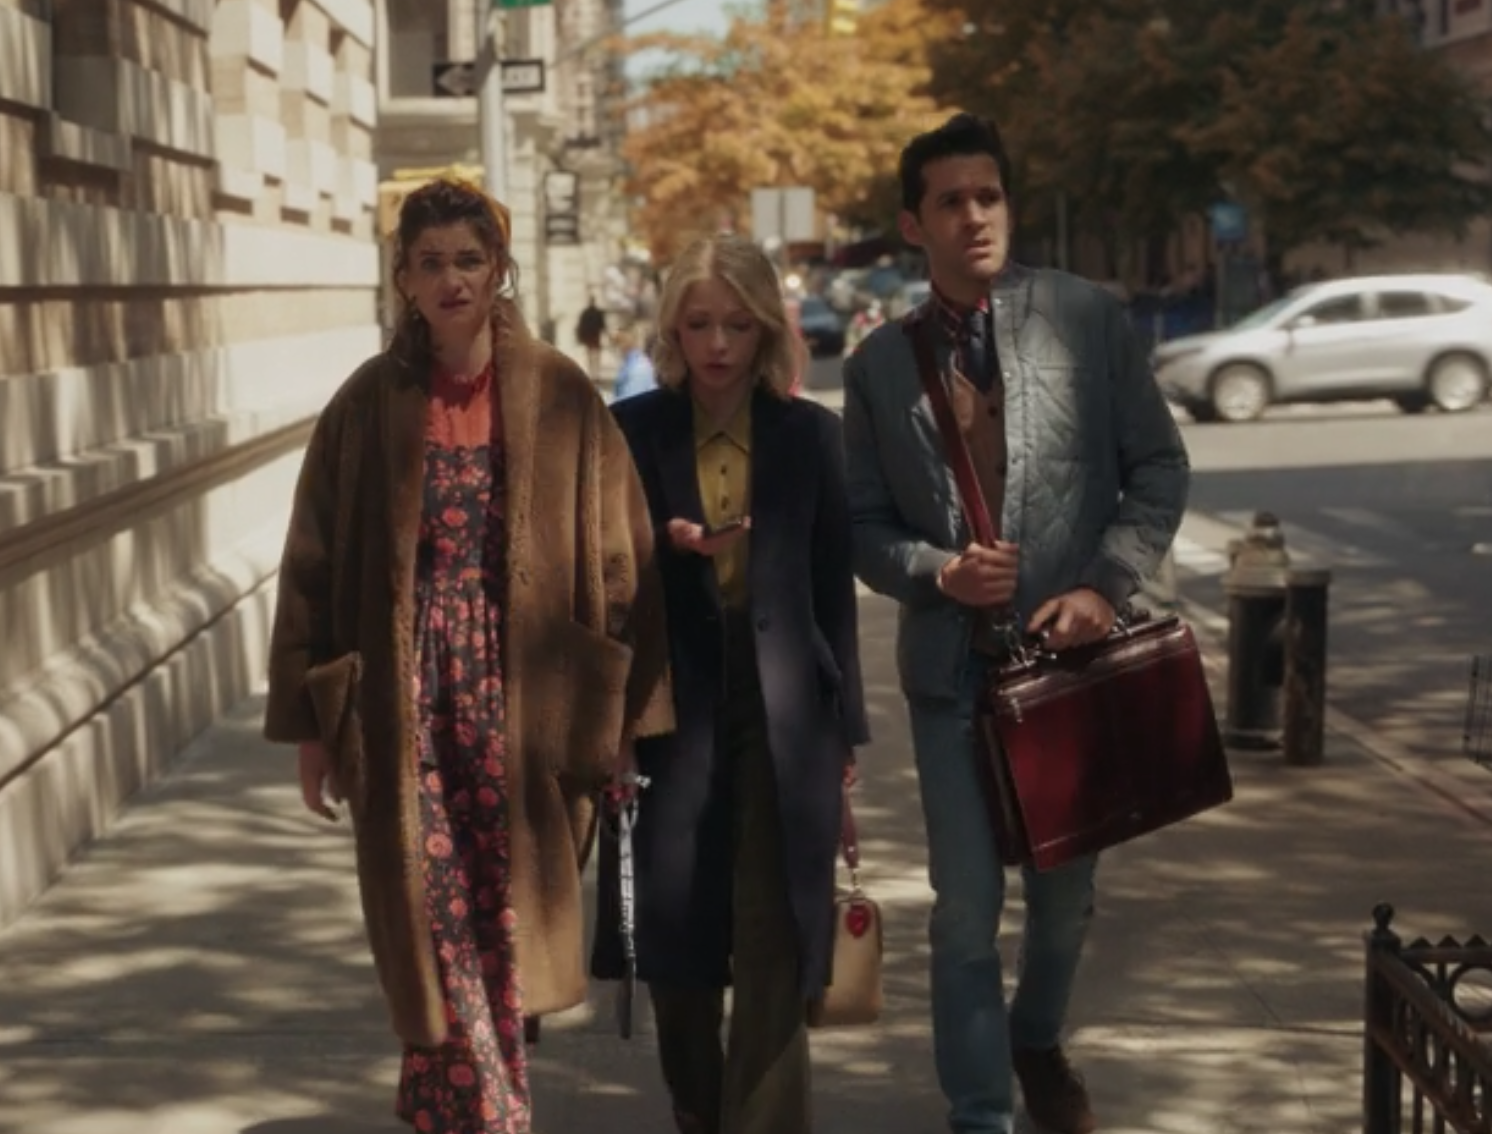 Wendy wears a floor length floral dress under a fur coat, Kate Keller wears a brightly colored blouse under a dark jacket with matching pants, and Jordan Glassberg wears a vest under a puffy jacket and jeans